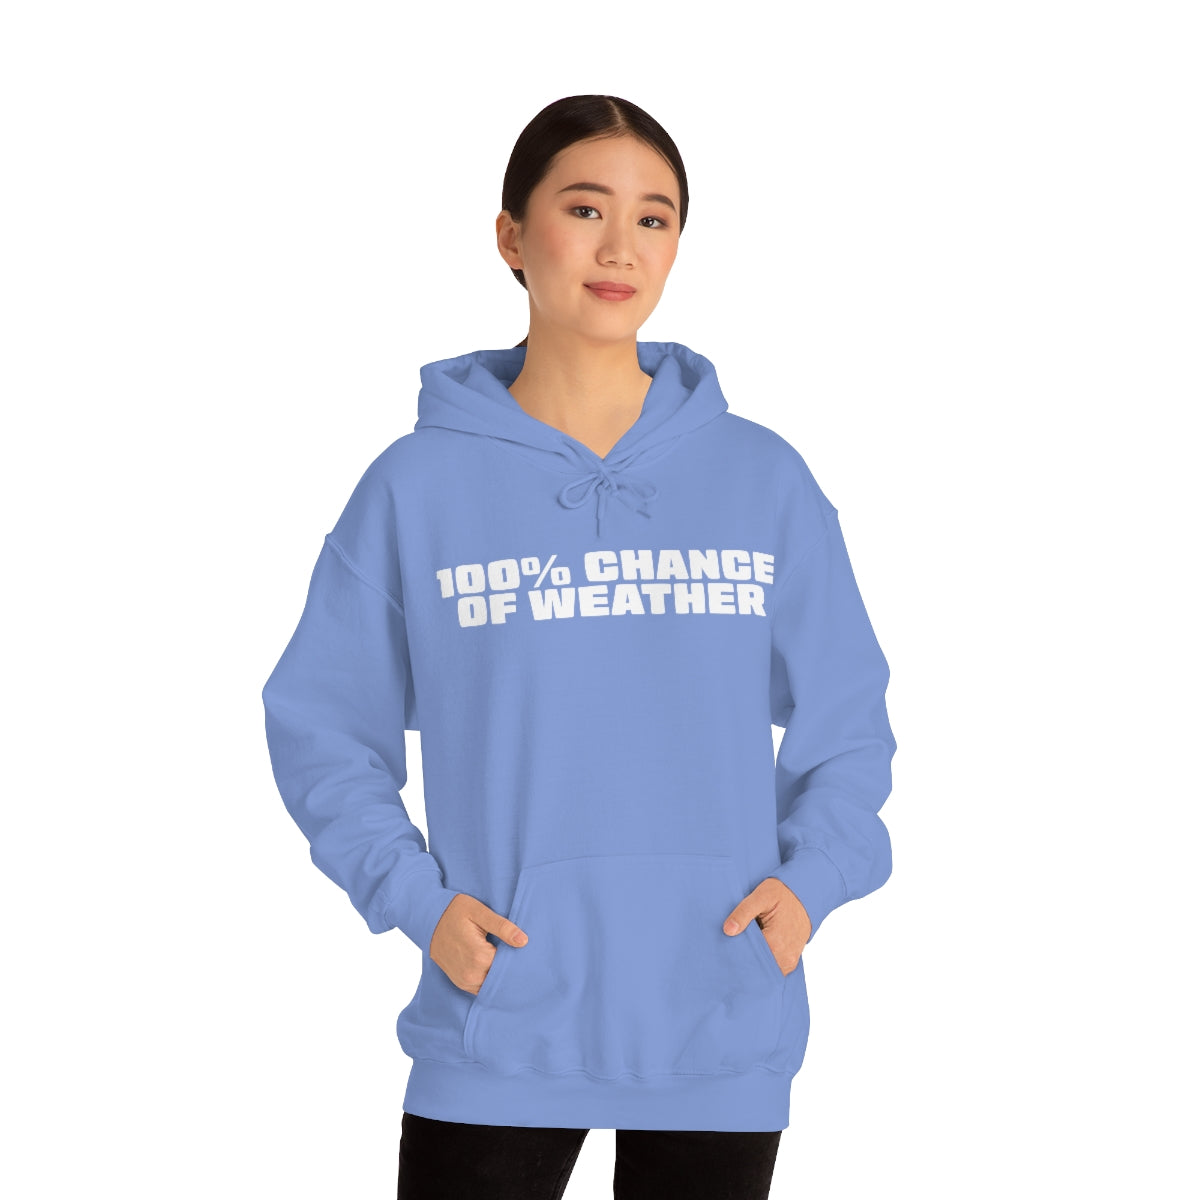 100% Chance of Weather Hoodie 